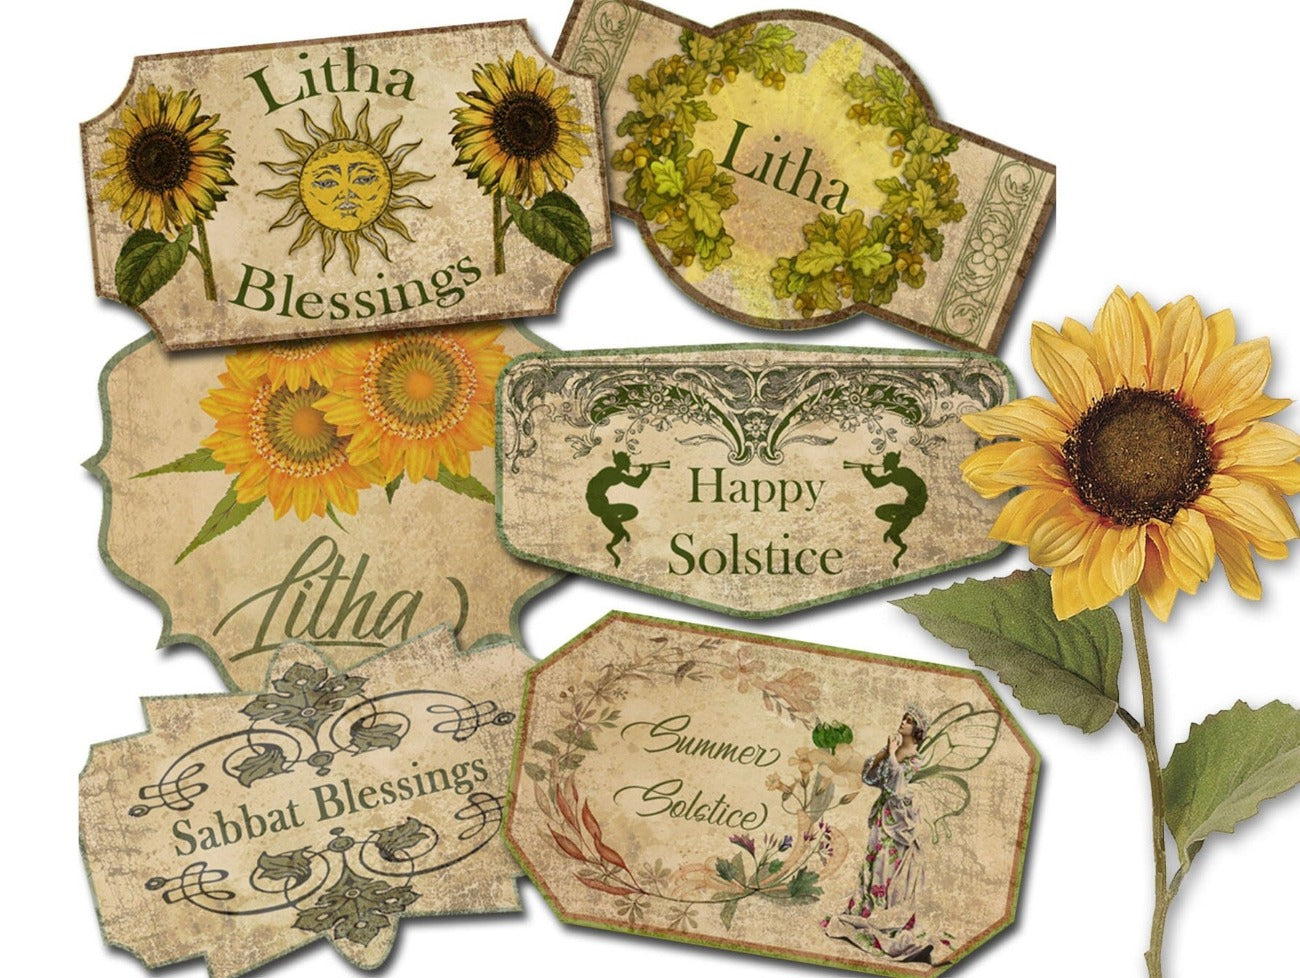 LITHA LABELS Printable 6 Labels, rustic parchment background, Sabbat sayings, sunflowers, oak leaves and fairies - Morgana Magick Spell